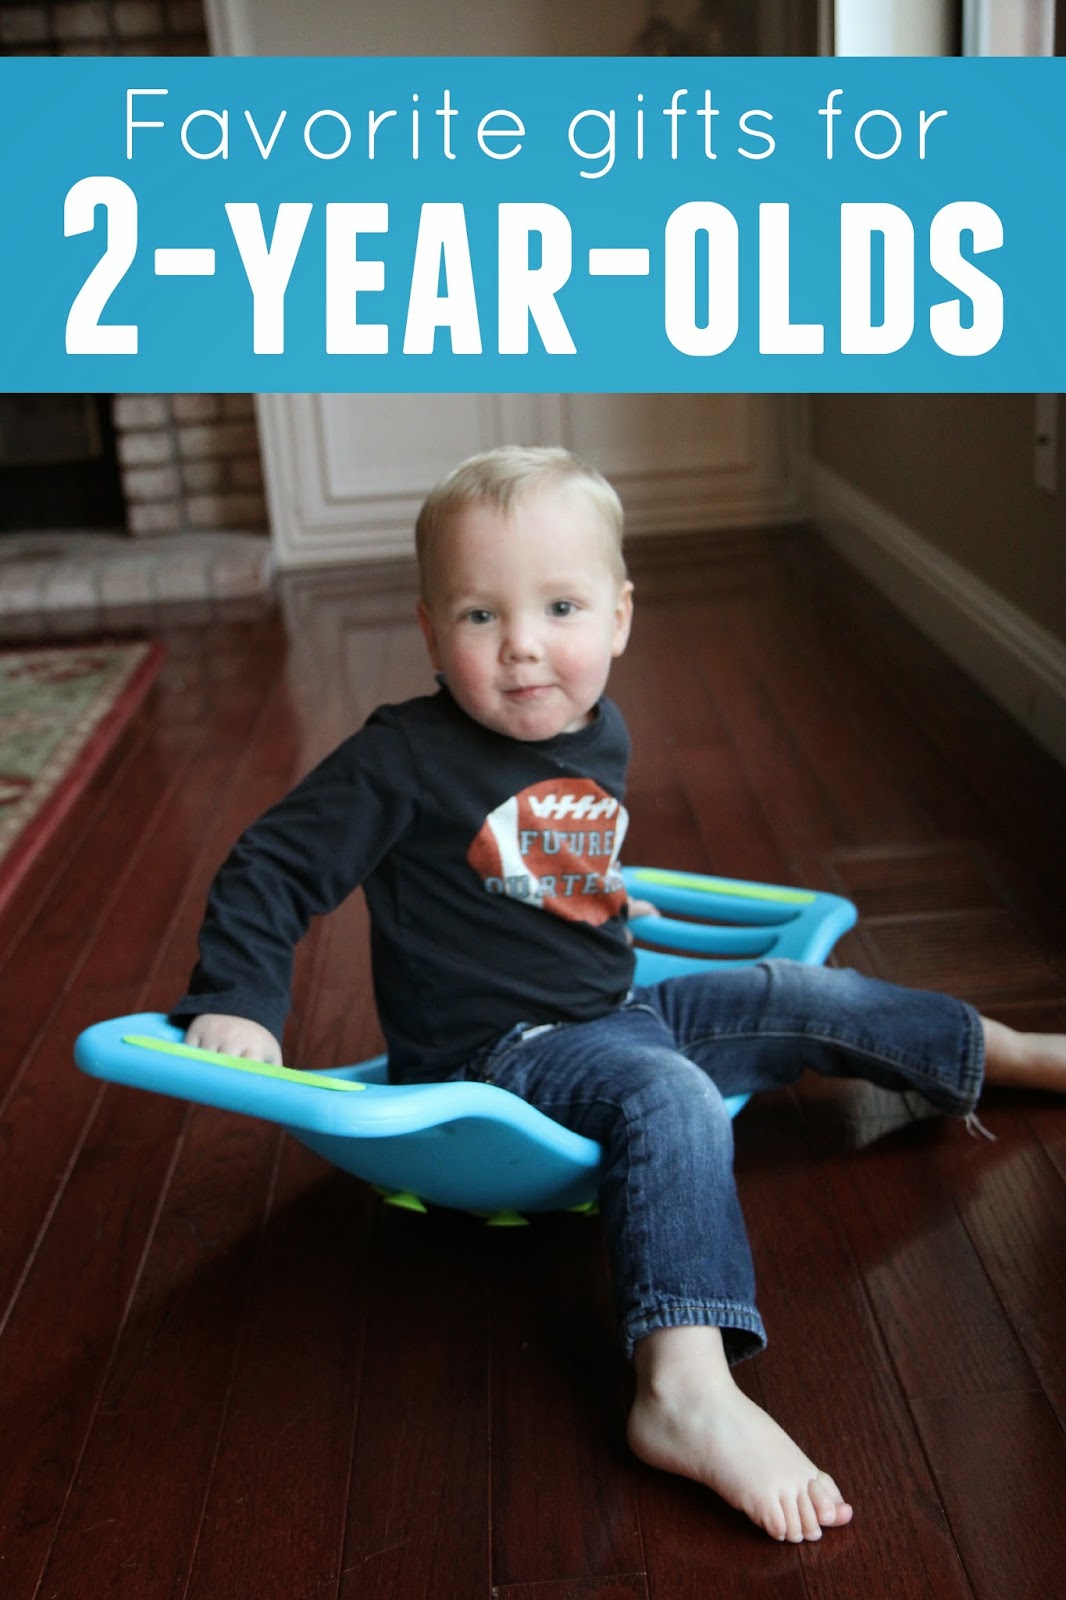 Toddler Approved! Favorite Gifts for 2 Year Olds